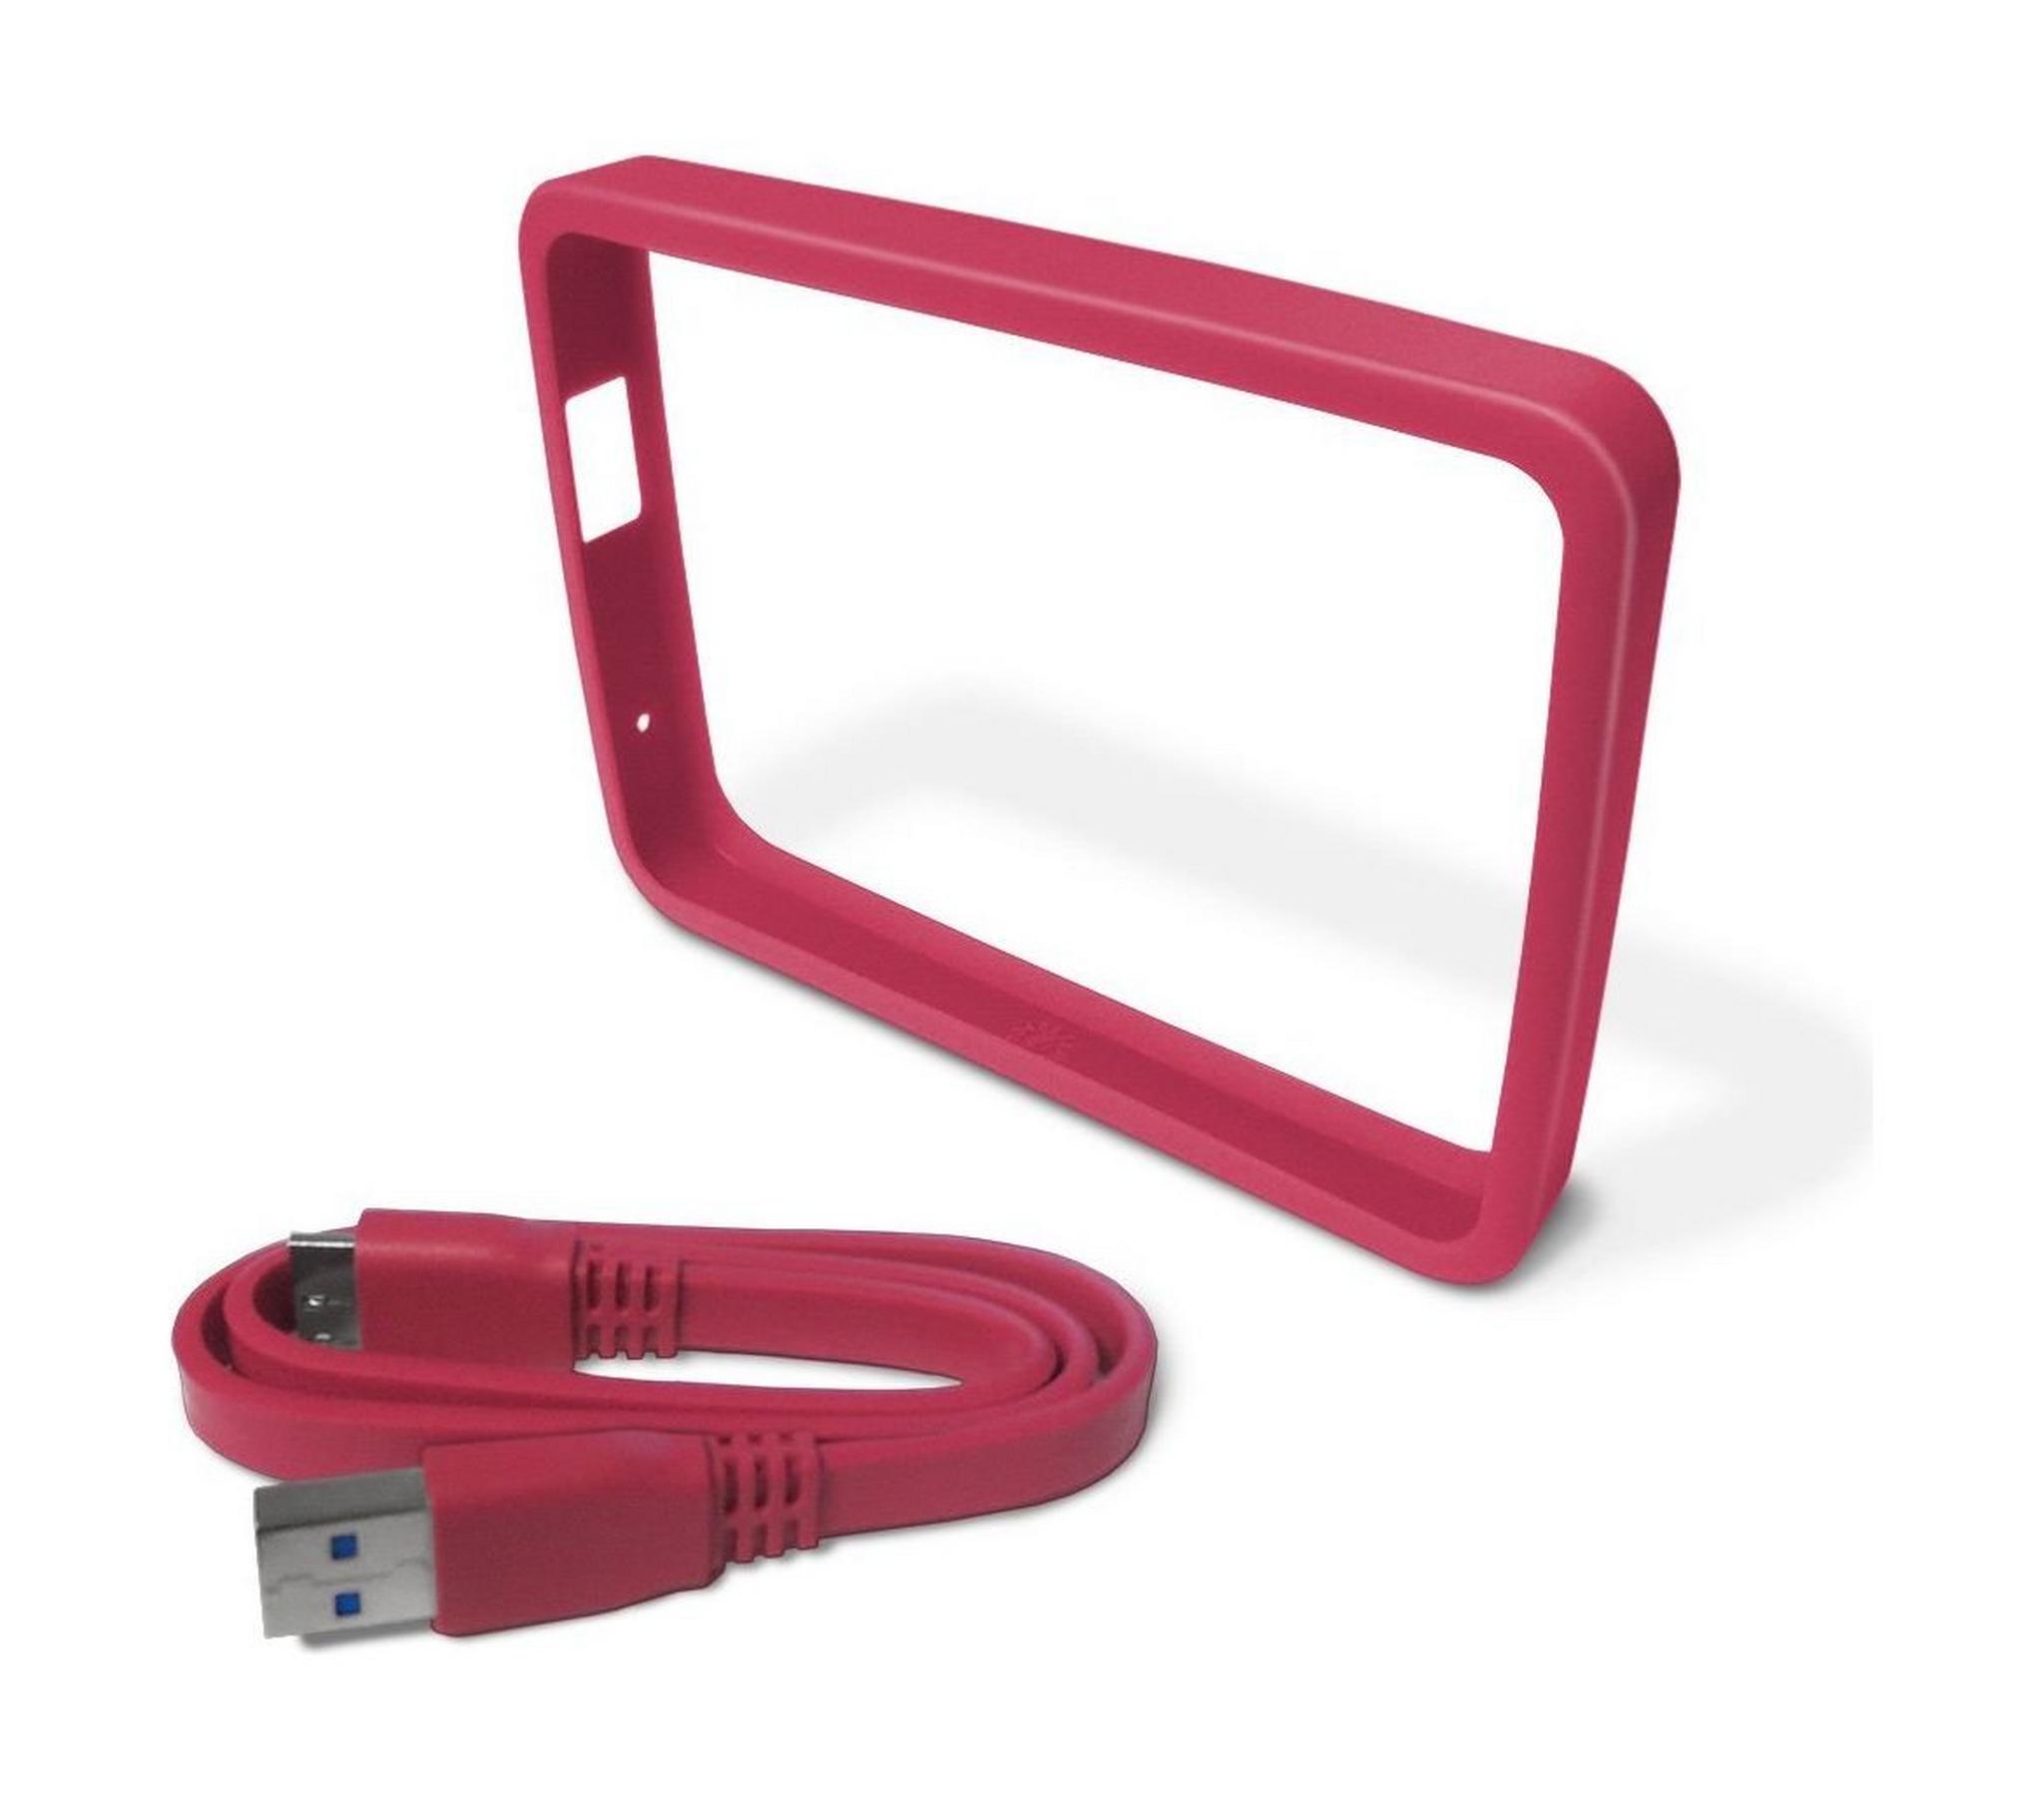 Western Digital Grip Pack For My Passport Ultra Drive with USB 3.0 Cable - Pink